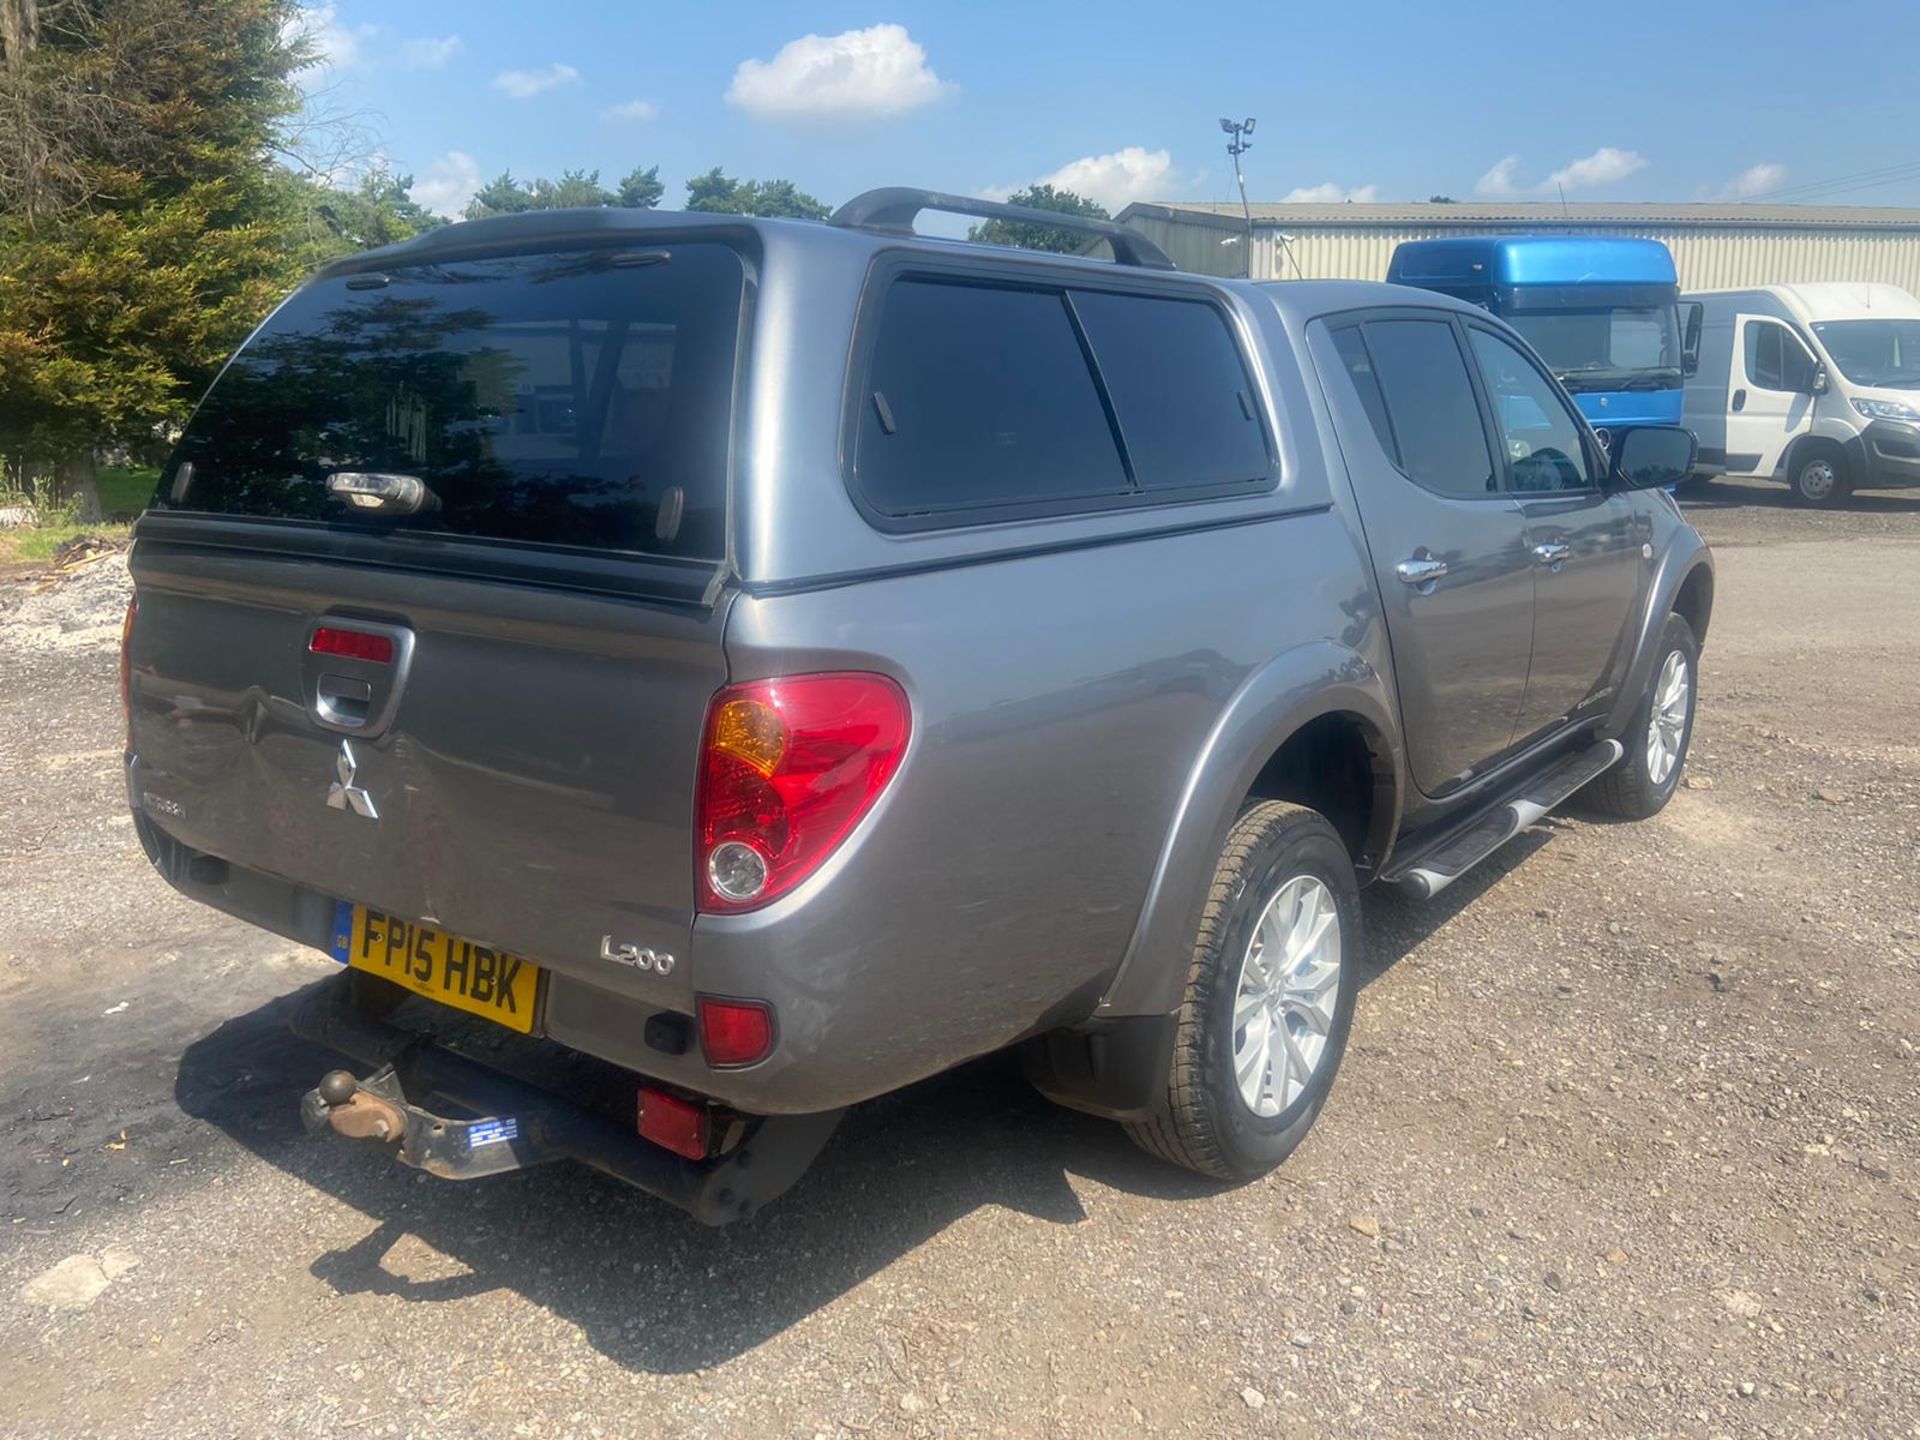 2015 MITSUBISHI L200 CHALLENGER LB DCB DI-D 4X4 GREY PICKUP, 75K MILES WITH 7 SERVICE STAMPS *NO VAT - Image 6 of 12